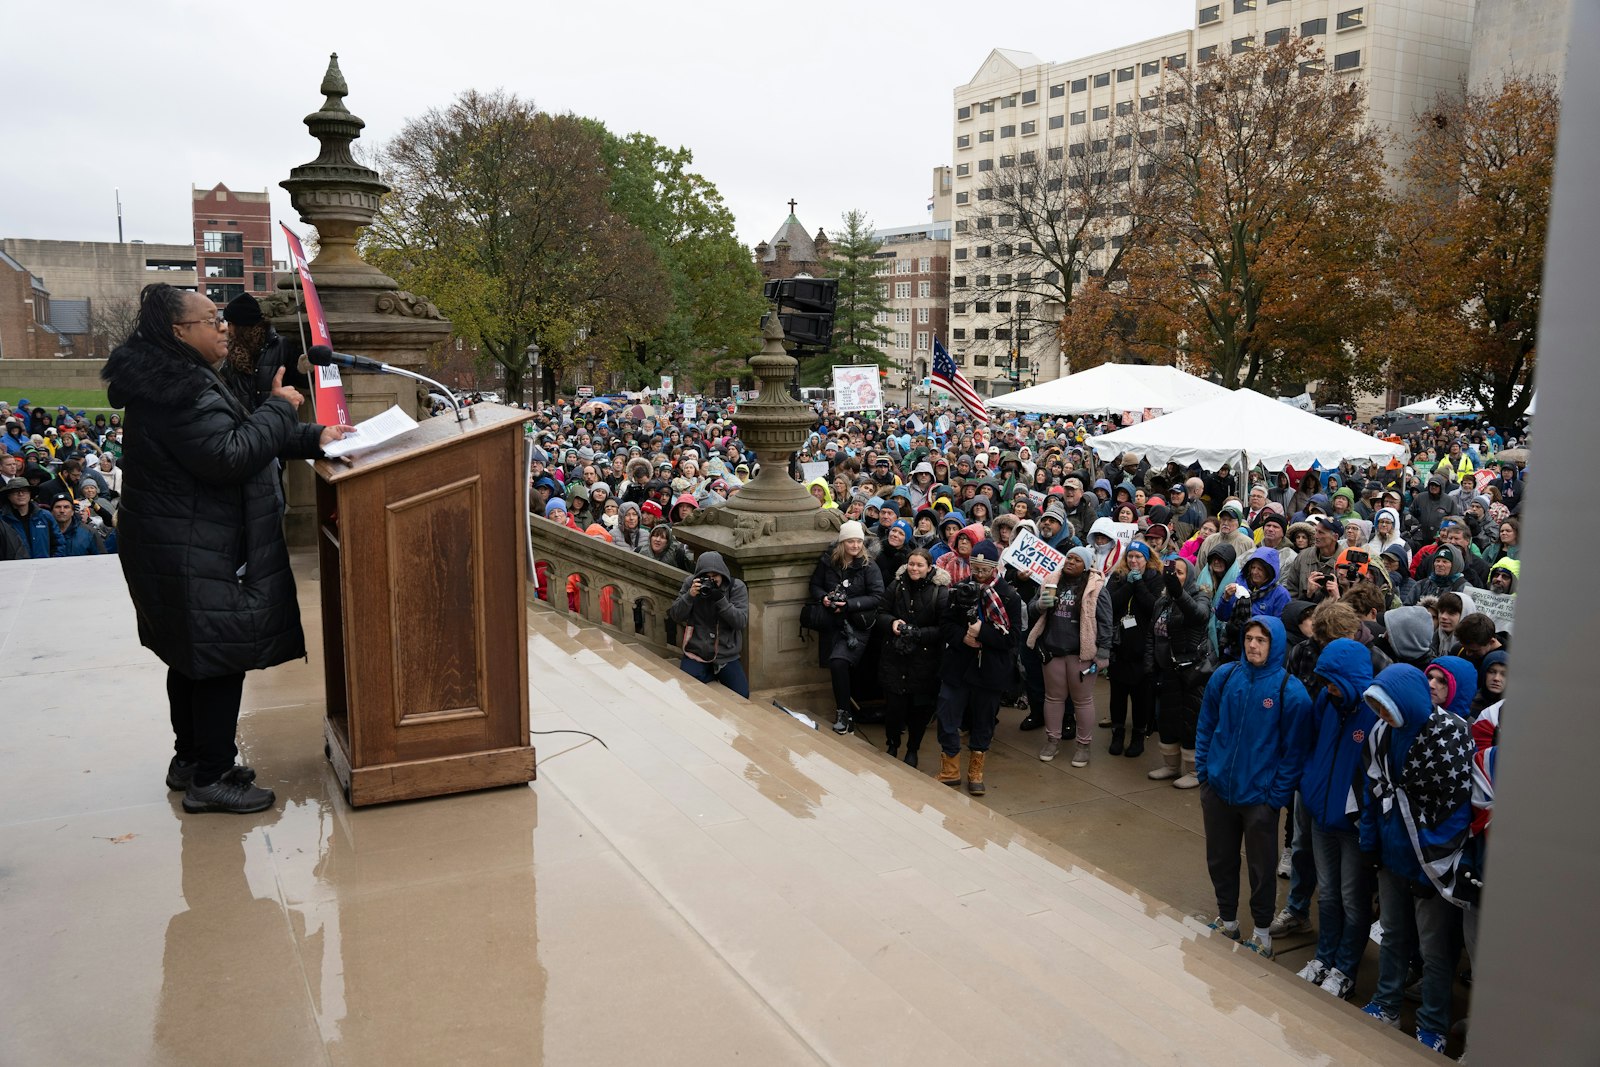 Local and national pro-life speakers addressed the gathered crowd, which numbered in the thousands, from the steps of Michigan's Capitol building.